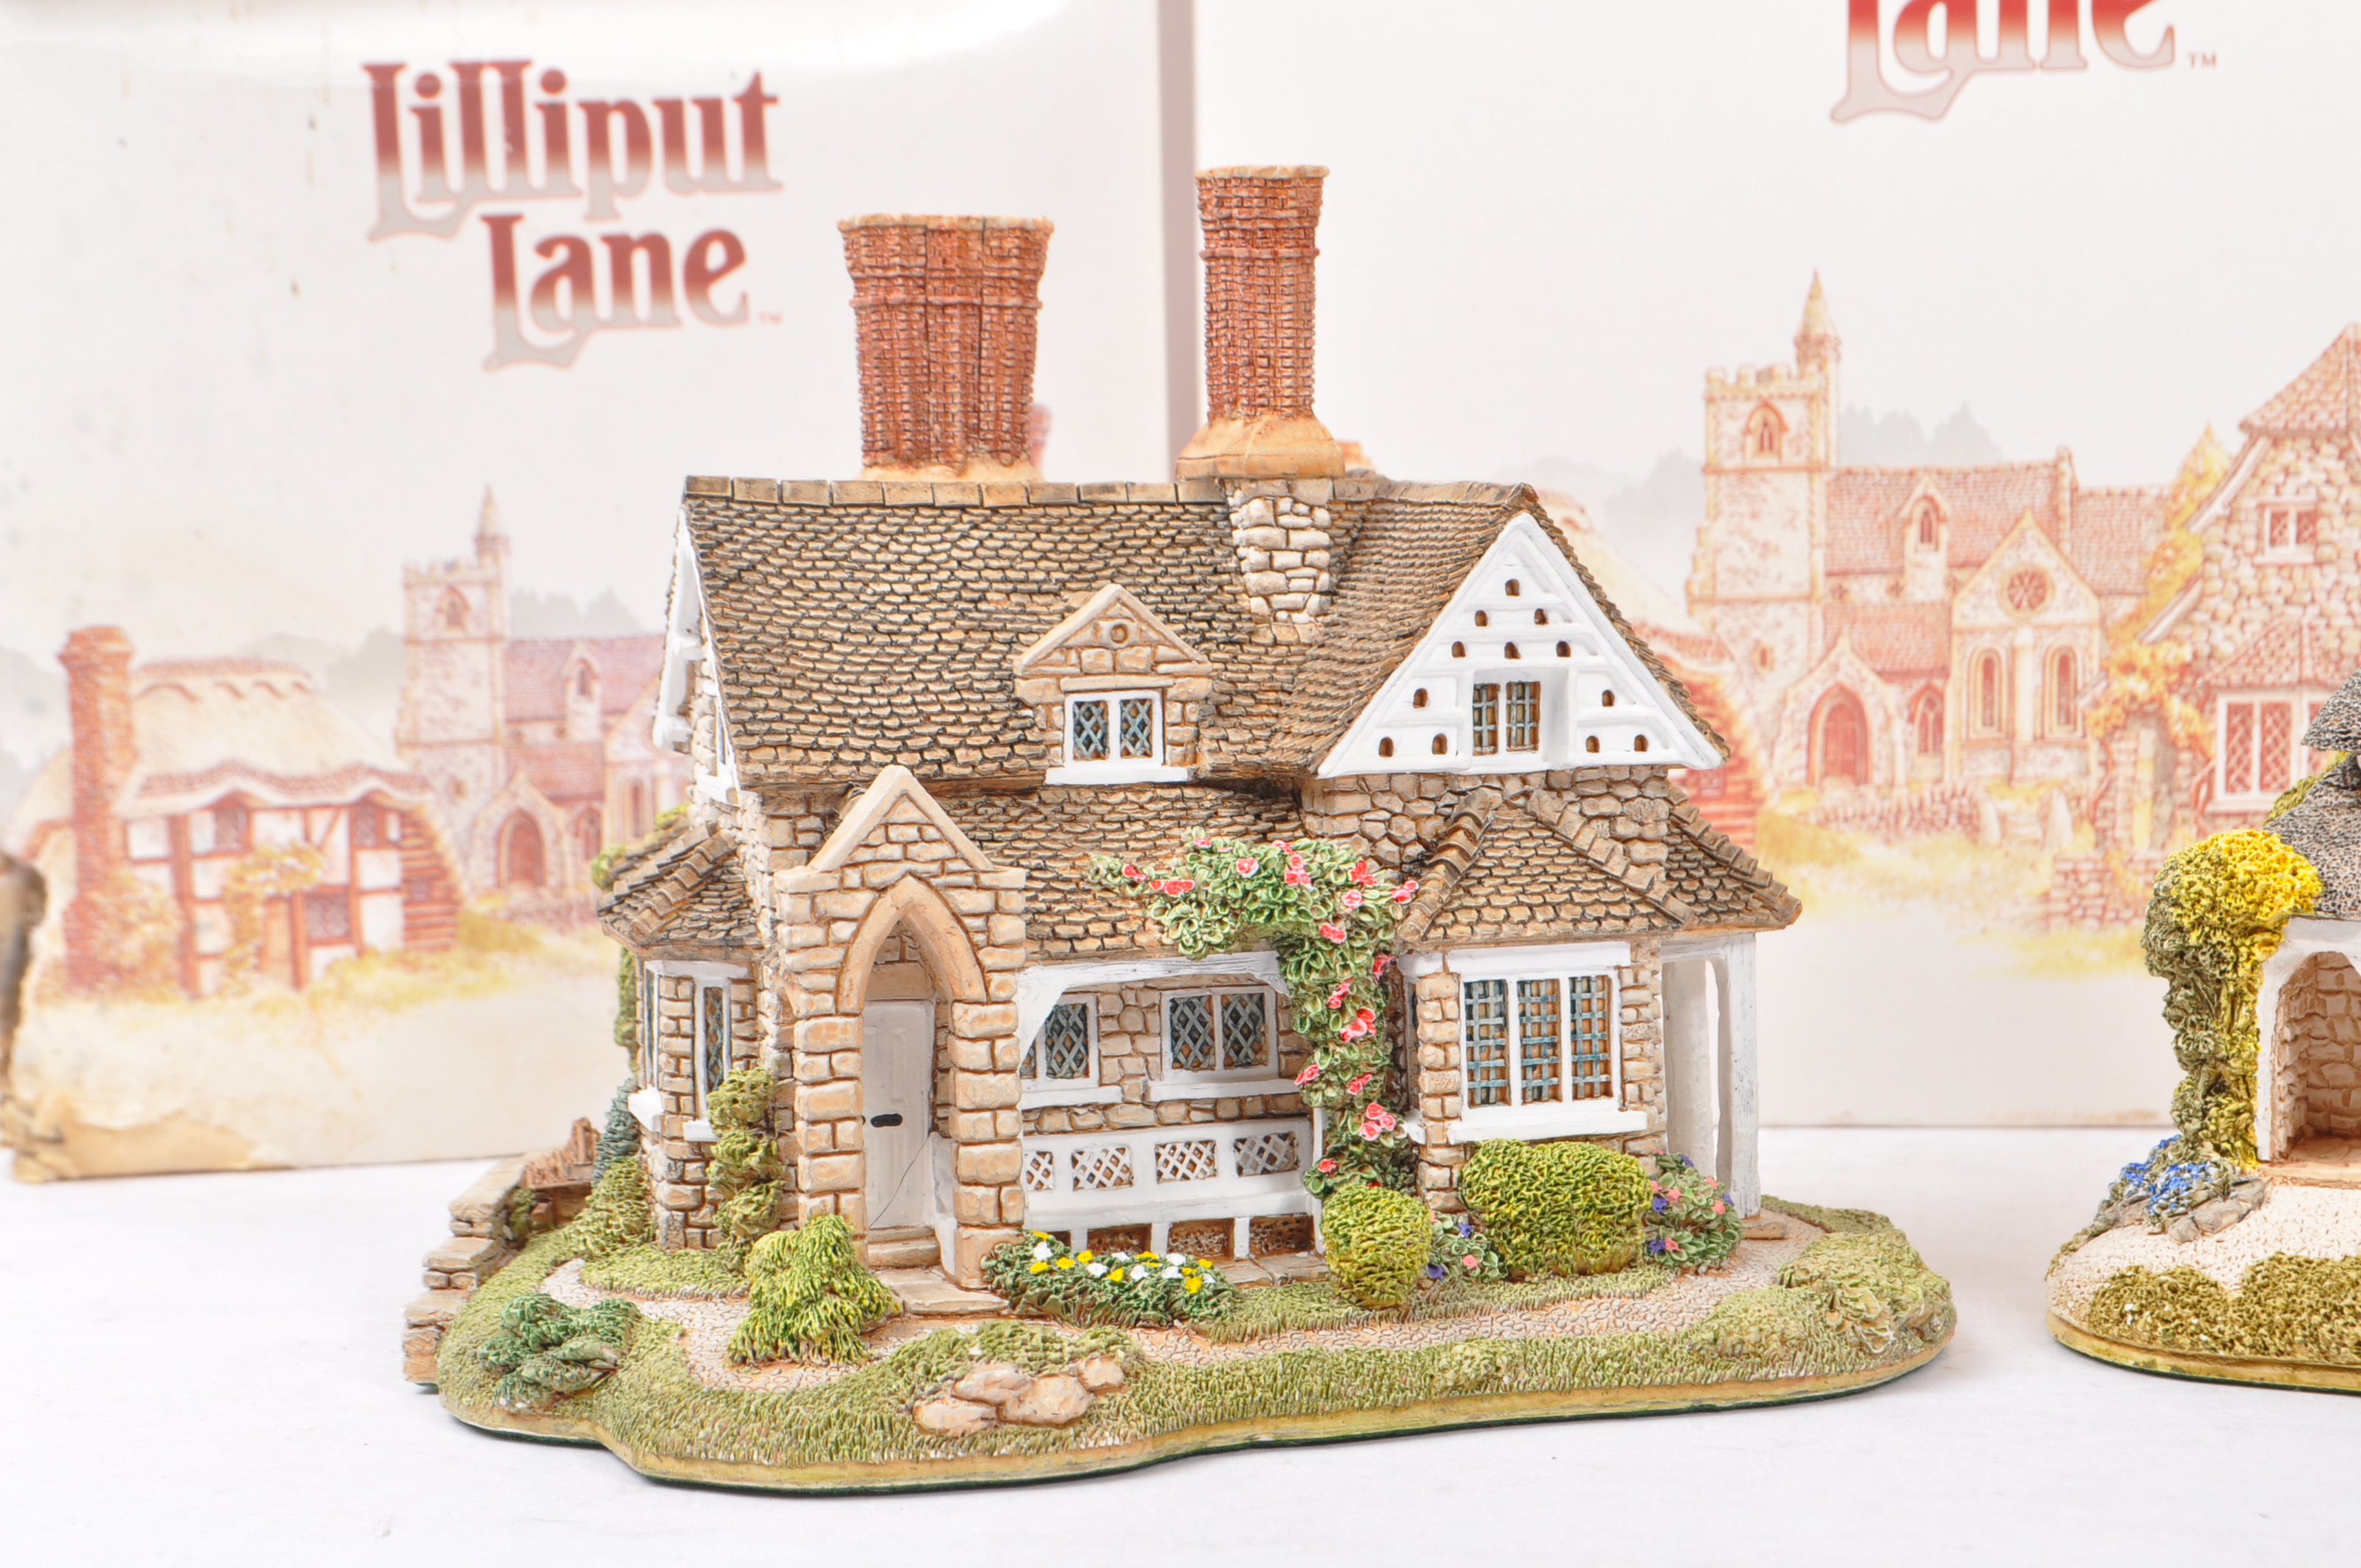 LILLIPUT LANE - COLLECTION OF HOUSE / COTTAGE RESIN FIGURINES - Image 4 of 9